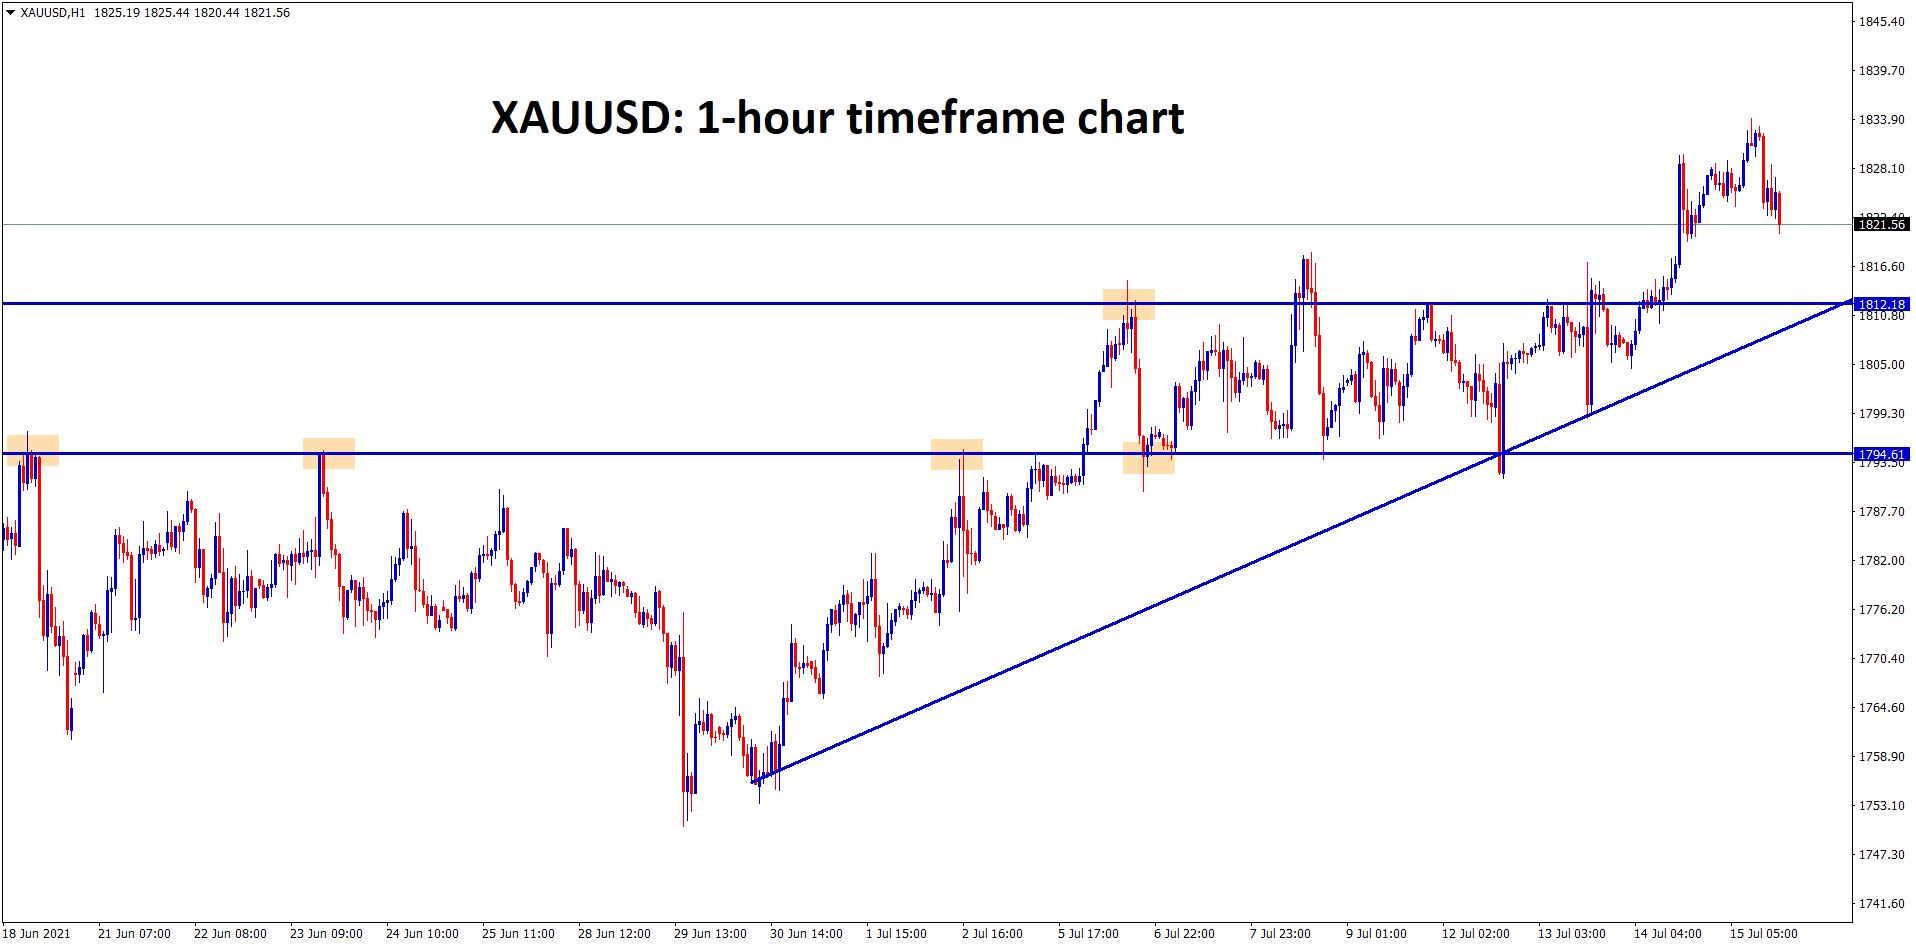 XAUUSD price is falling now to retest the recent broken resistance and higher low line which may act as temporary support